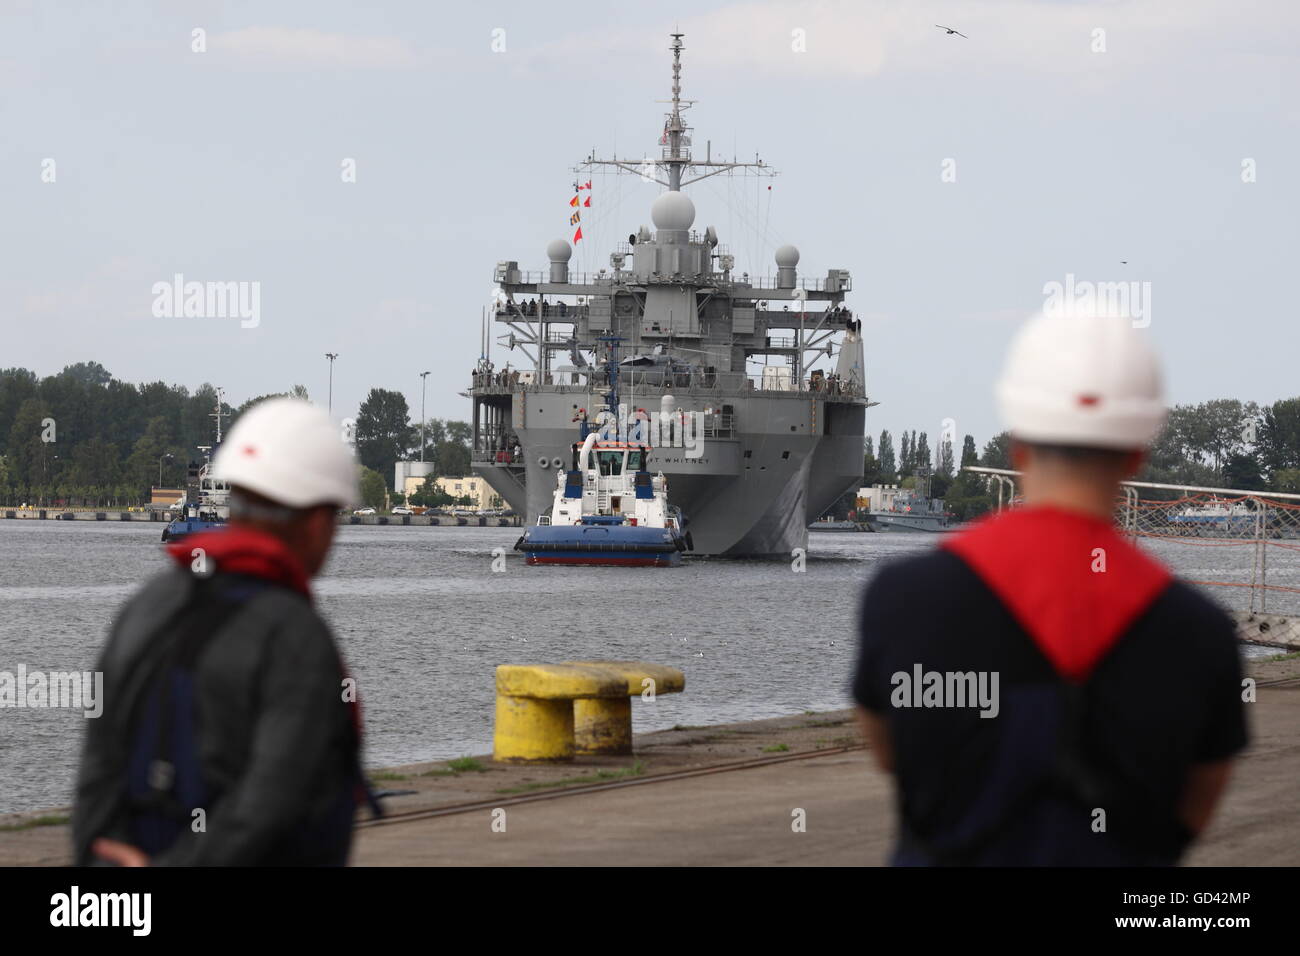 Gdynia, Poland 12th, July 2016 US Navy Ship USS Mount Whitney (LCC-20), a Blue Ridge class command ship,  visits the port of Gdynia for a routine port visit. The vessel with its 300 crew members took part in the international military exercise Ð BALTOPS16 in the Baltic Sea as a command ship.  During the visit to Gdynia the crew will take part in a series of community events and will play in a soccer match with representatives of the Polish Navy. Stock Photo